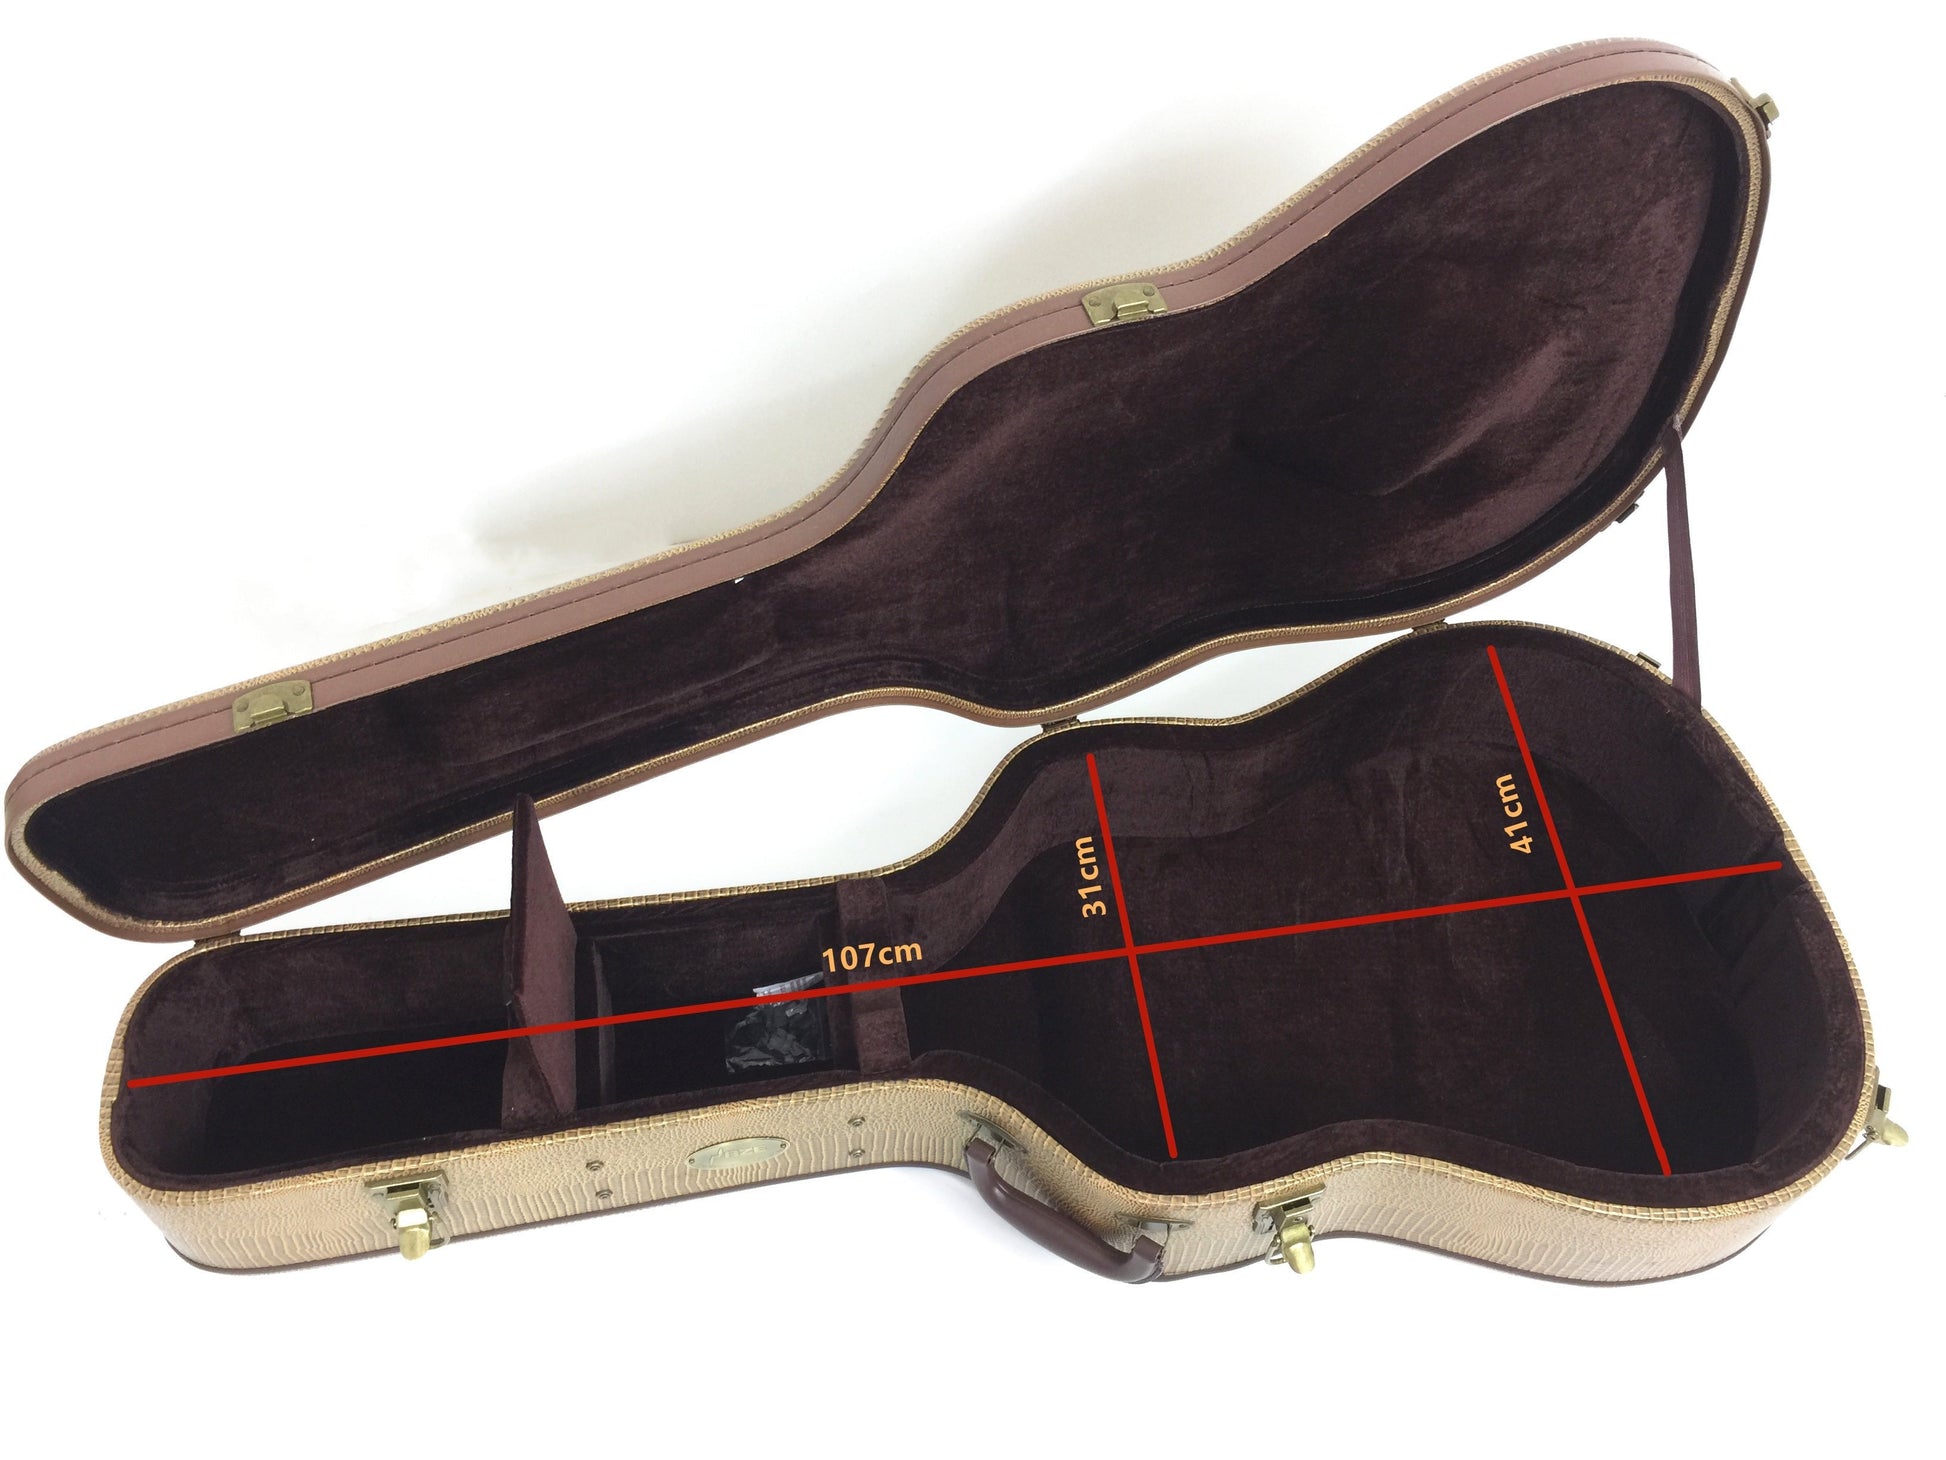 HPAA19020DB Arch Top Hard Case for Dreadnought Acoustic Guitar Lockable w/Key, Gold